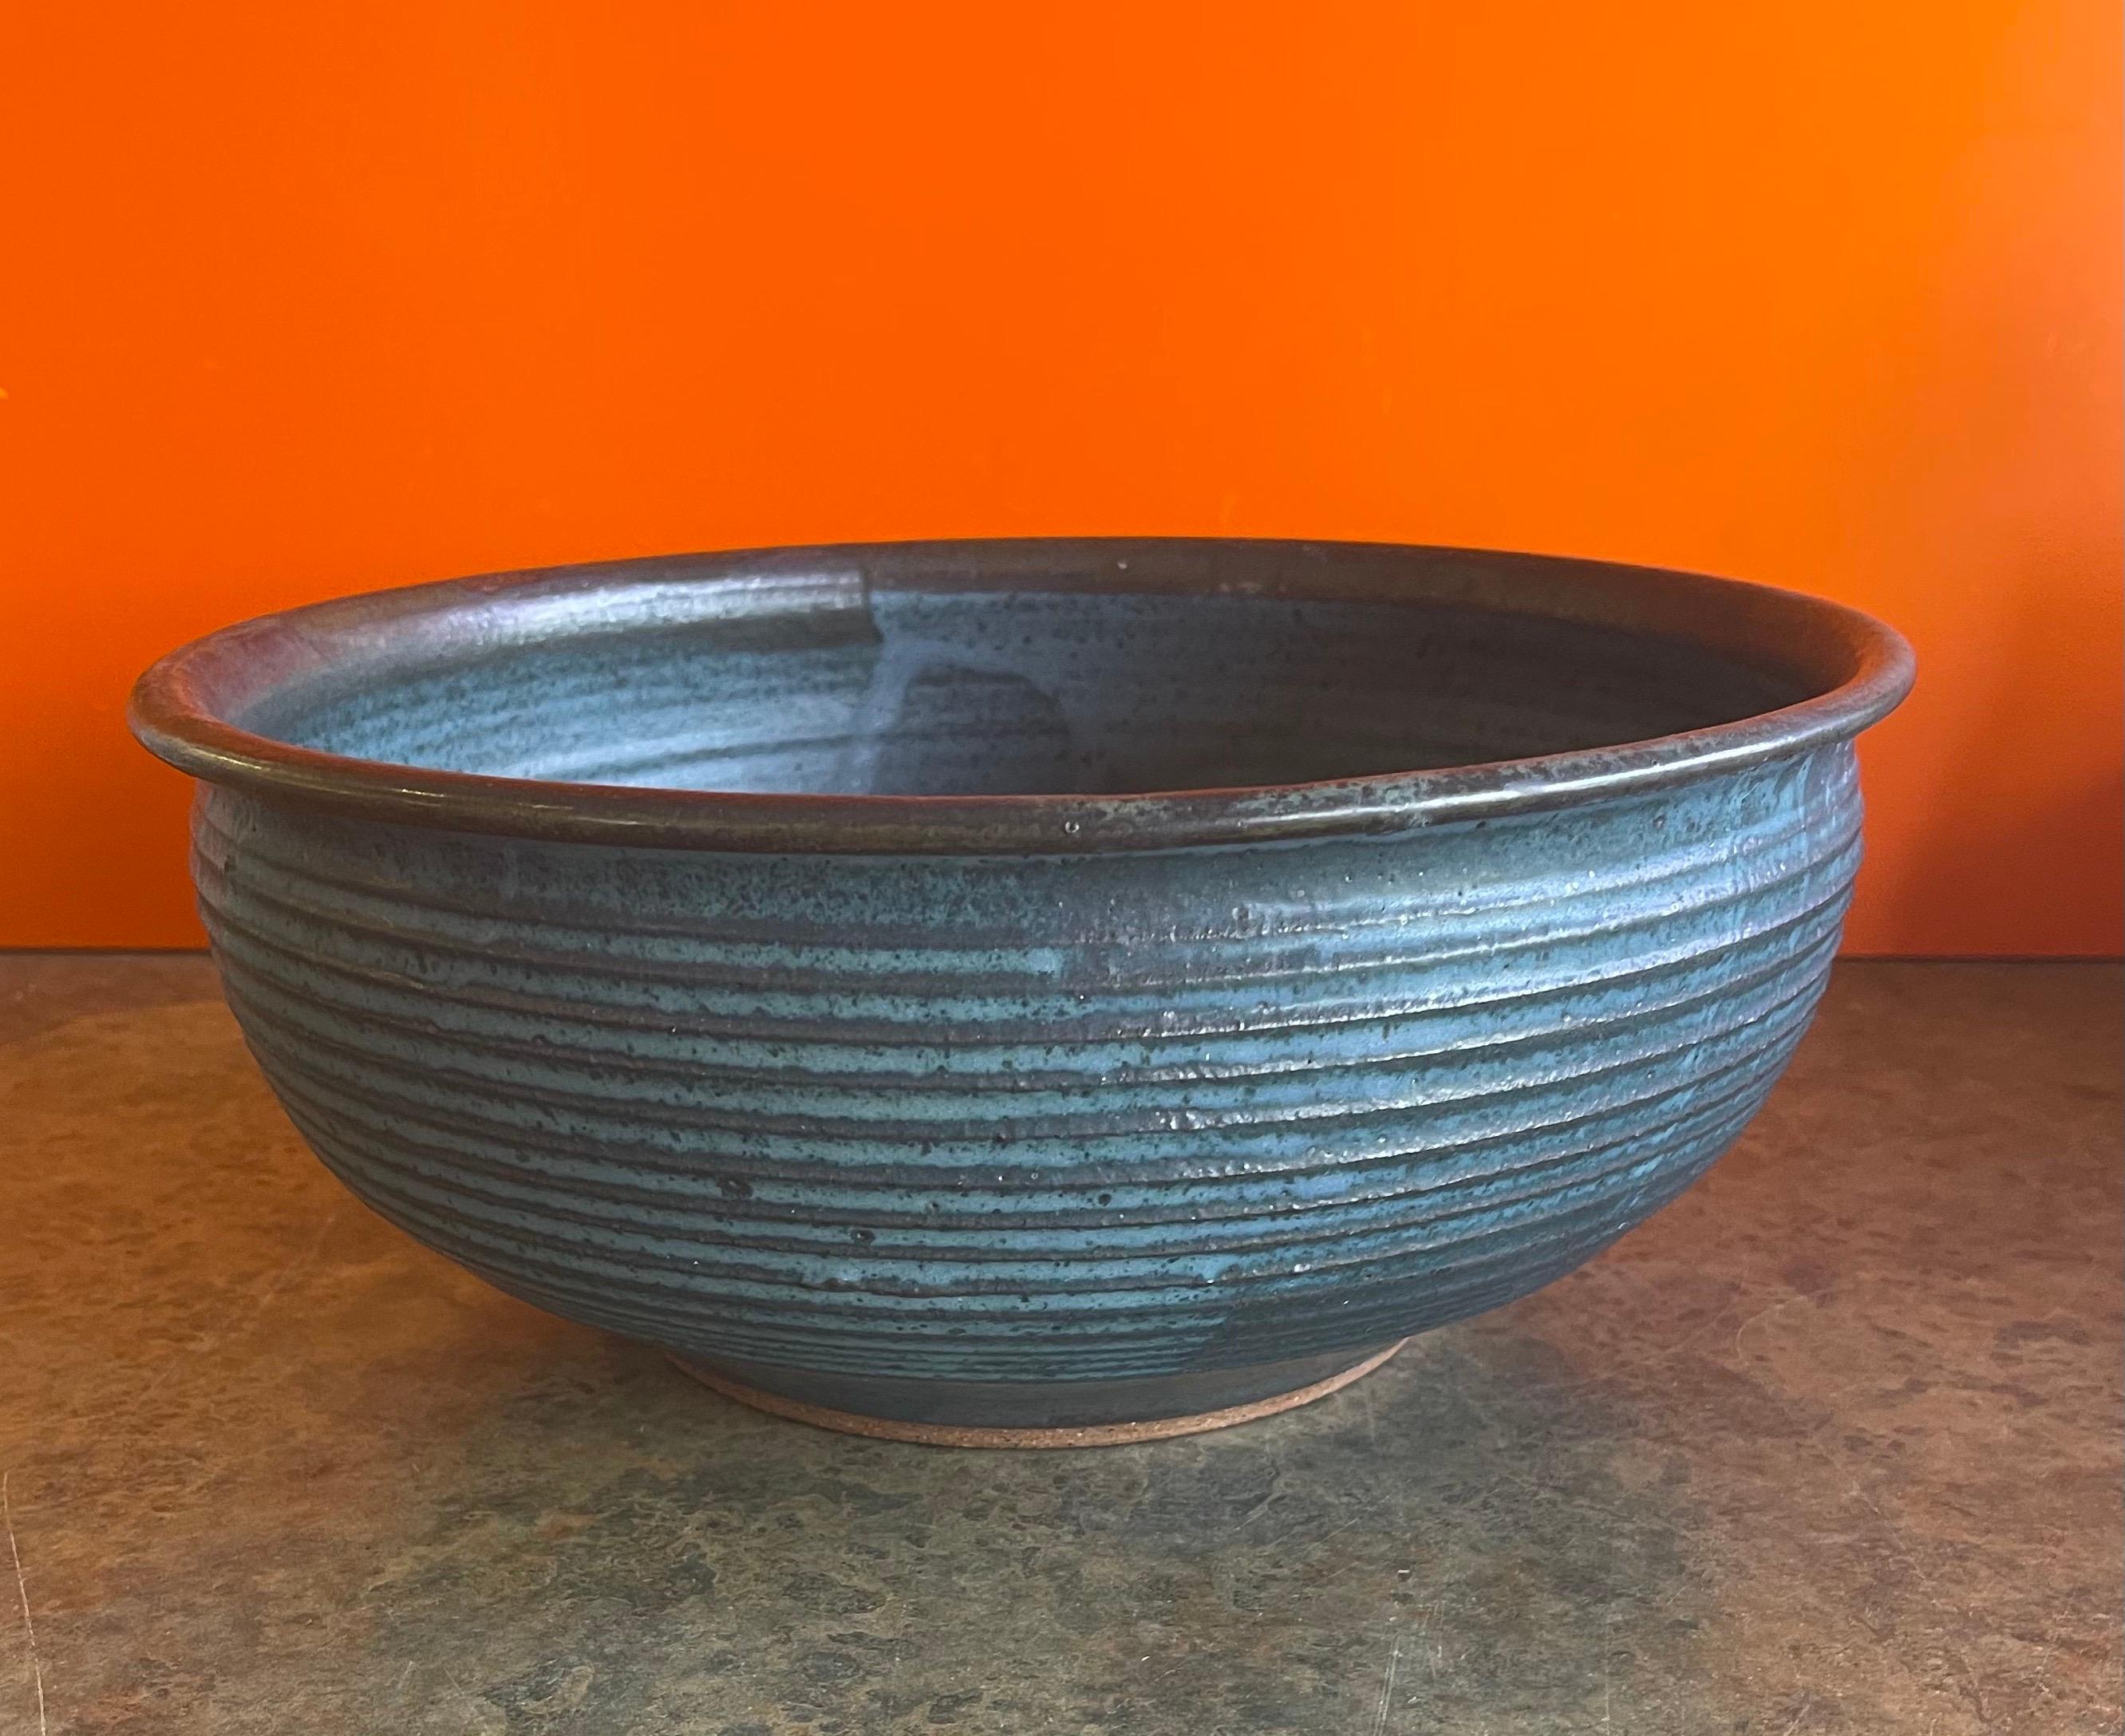 Extra large mesa blue stoneware studio pottery bowl by William Wyman, circa 1965. This studio art piece is quite rare and difficult to find. This gorgeous wheel thrown and hand finished bowl has a wonderful concentric design and vibrant blue colors.